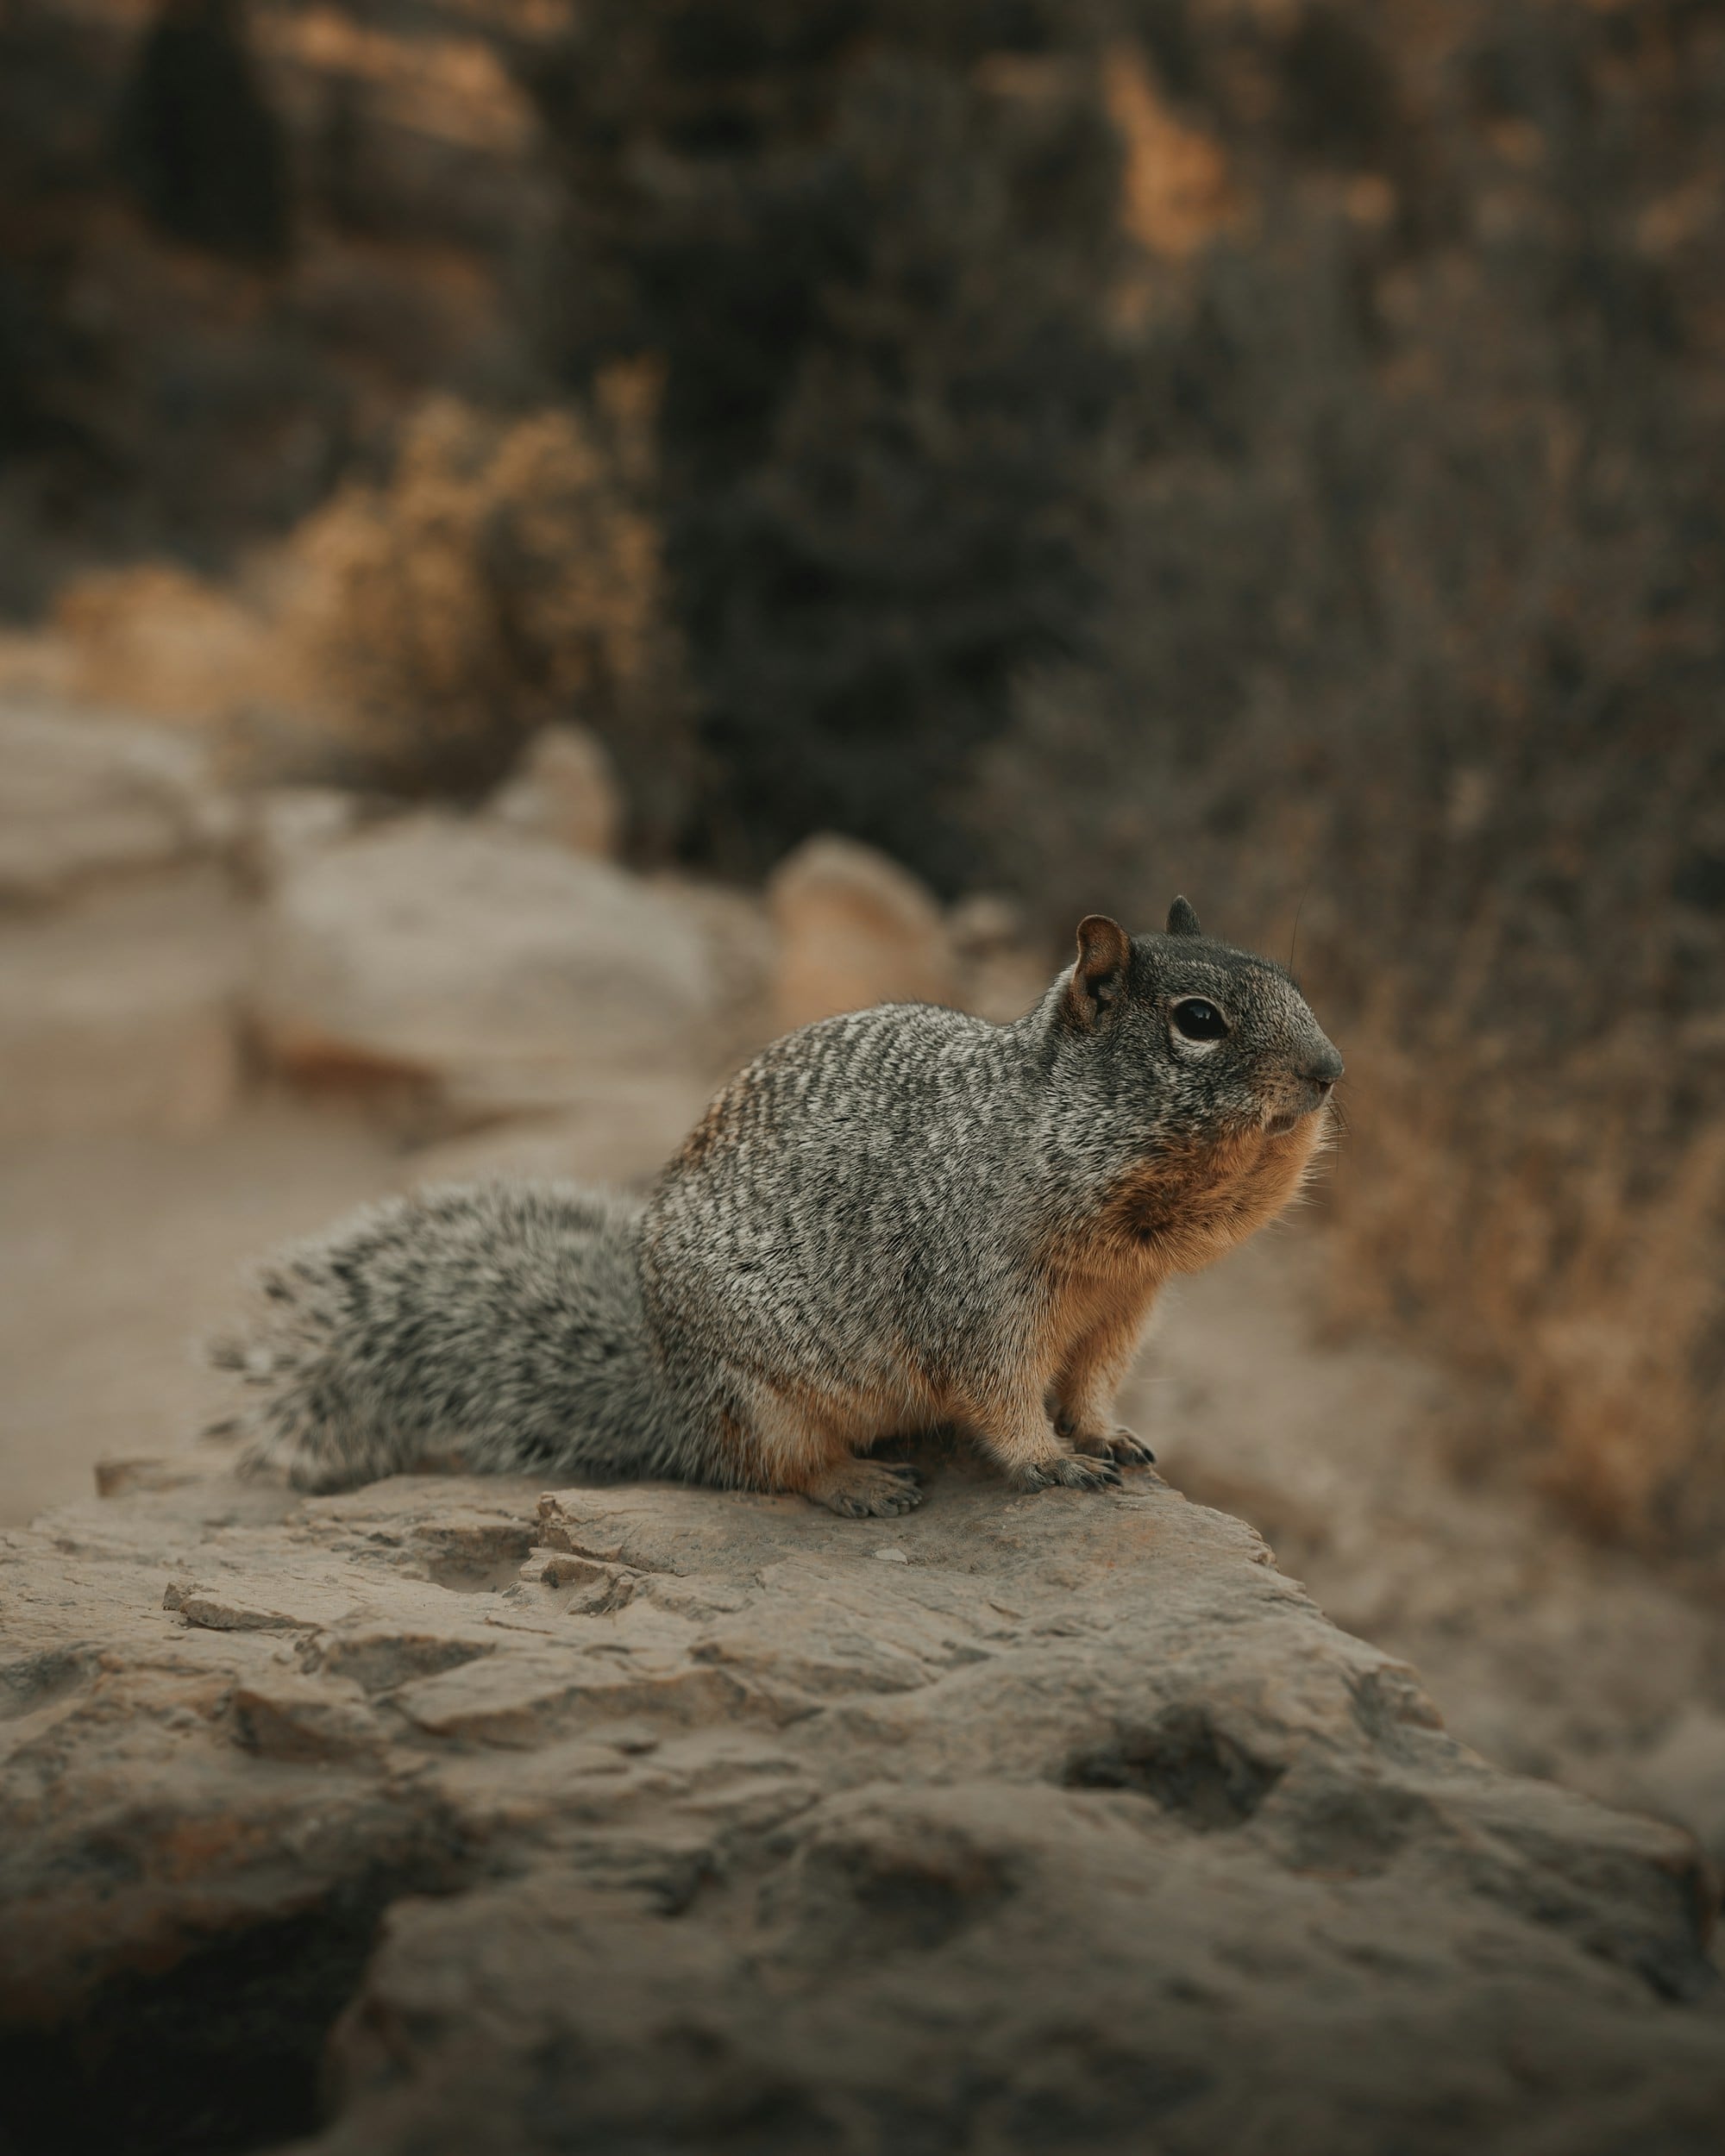 Our Team is fully equipped with the proper materials for the removal of Rock Squirrels in Austin, TX